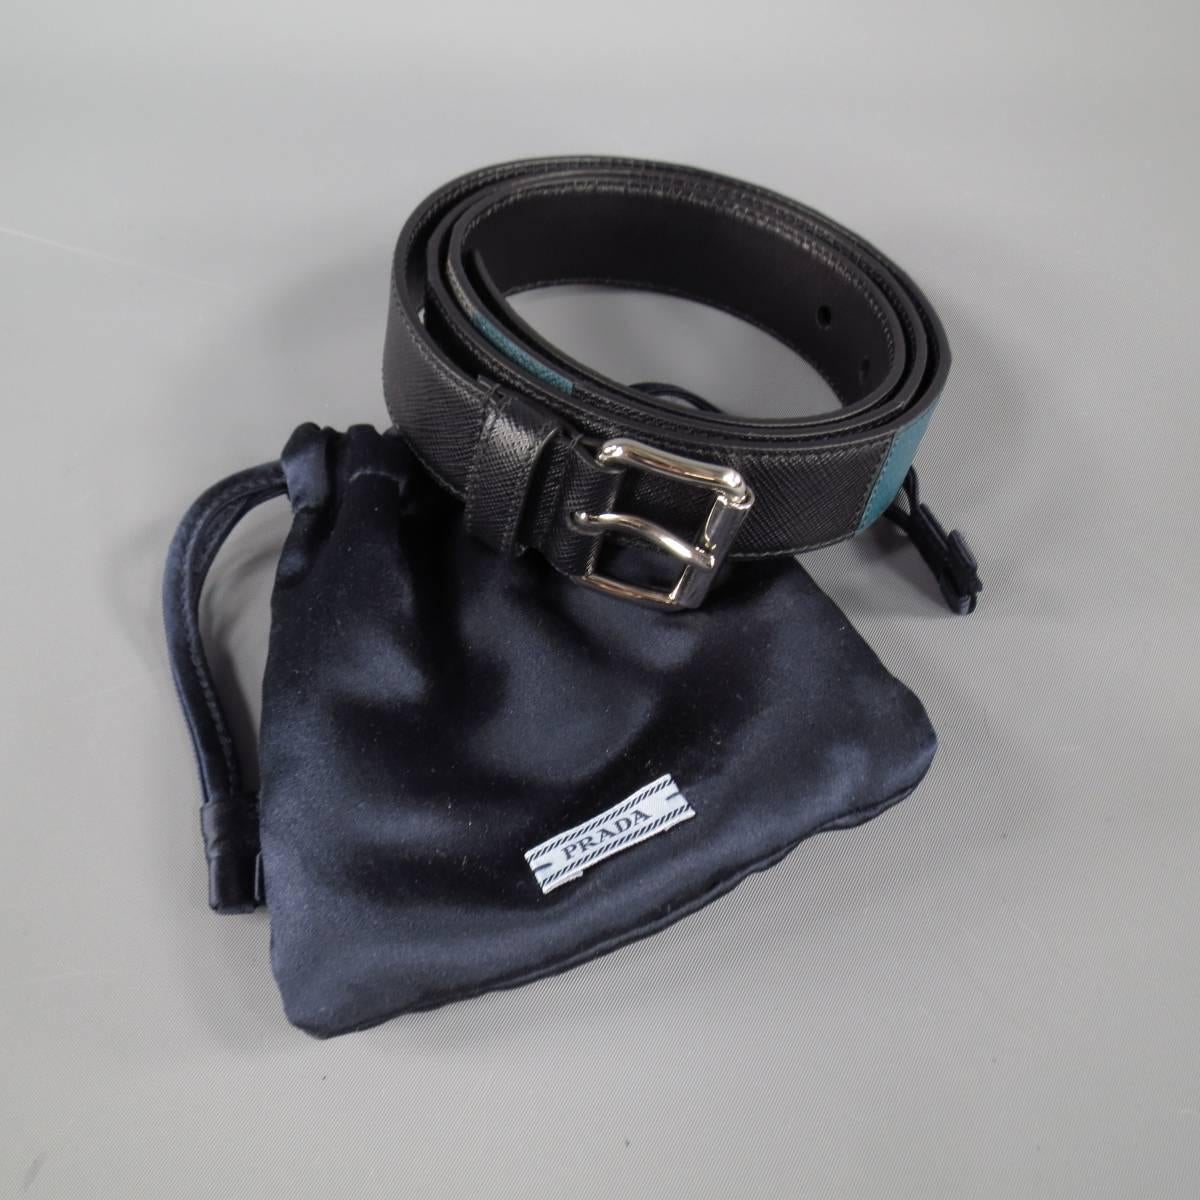 PRADA casual dress belt features high shine metal hardware and minimal patchwork leather construction in black, blue, gray, and red, made in Italy.
 
Excellent Pre-Owned Condition - with dust bag -     Marked: 40
 
Measurements:
 
Total